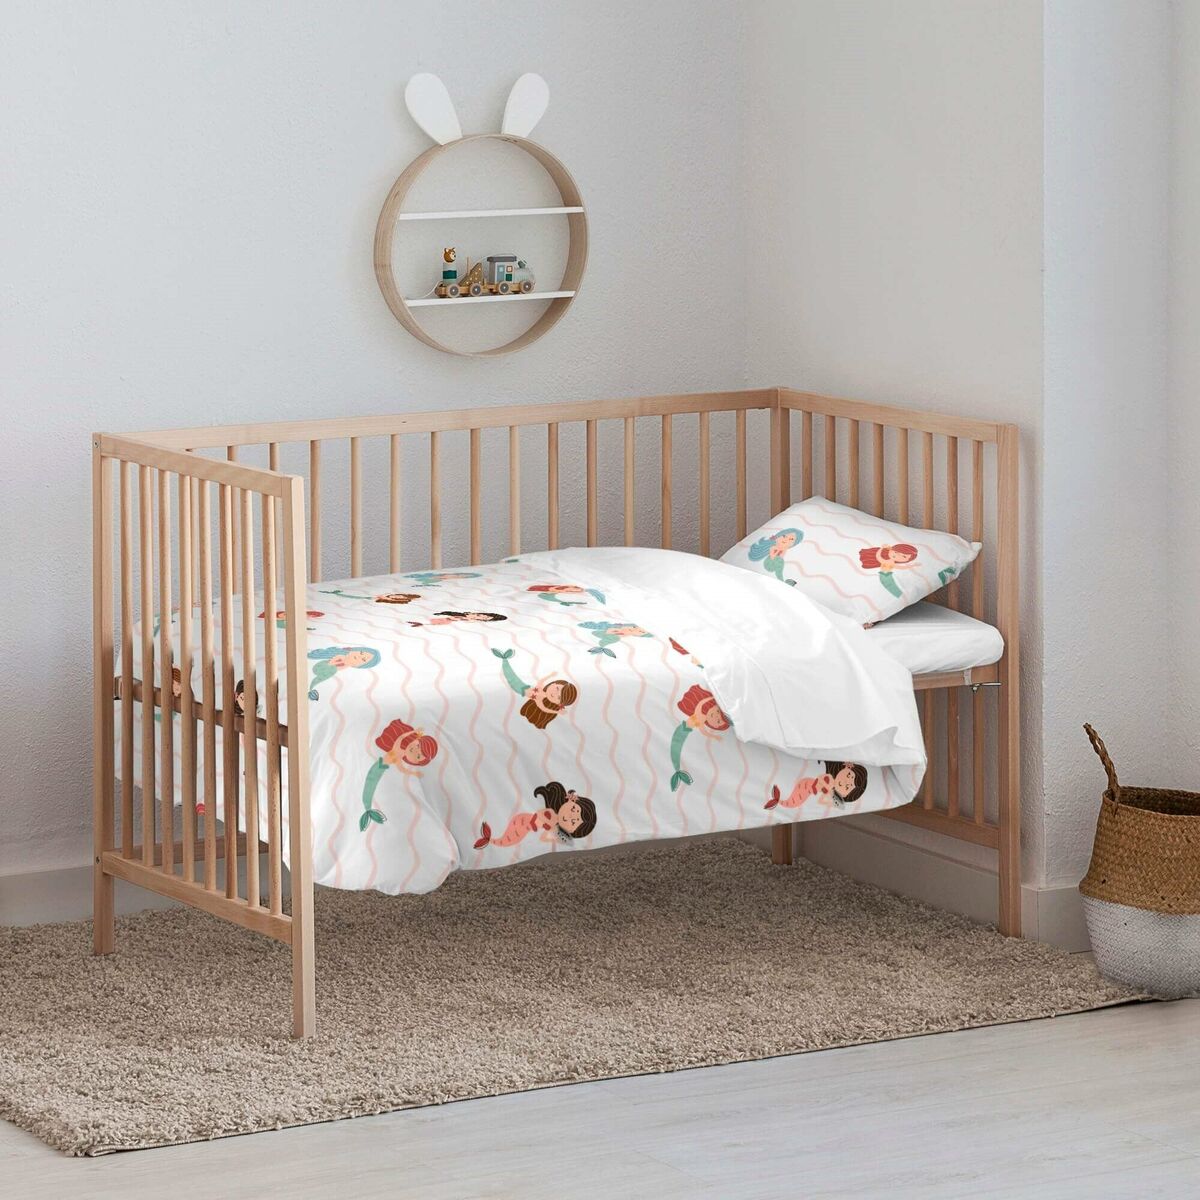 Cot Quilt Cover Kids&Cotton Mosi Small 115 x 145 cm